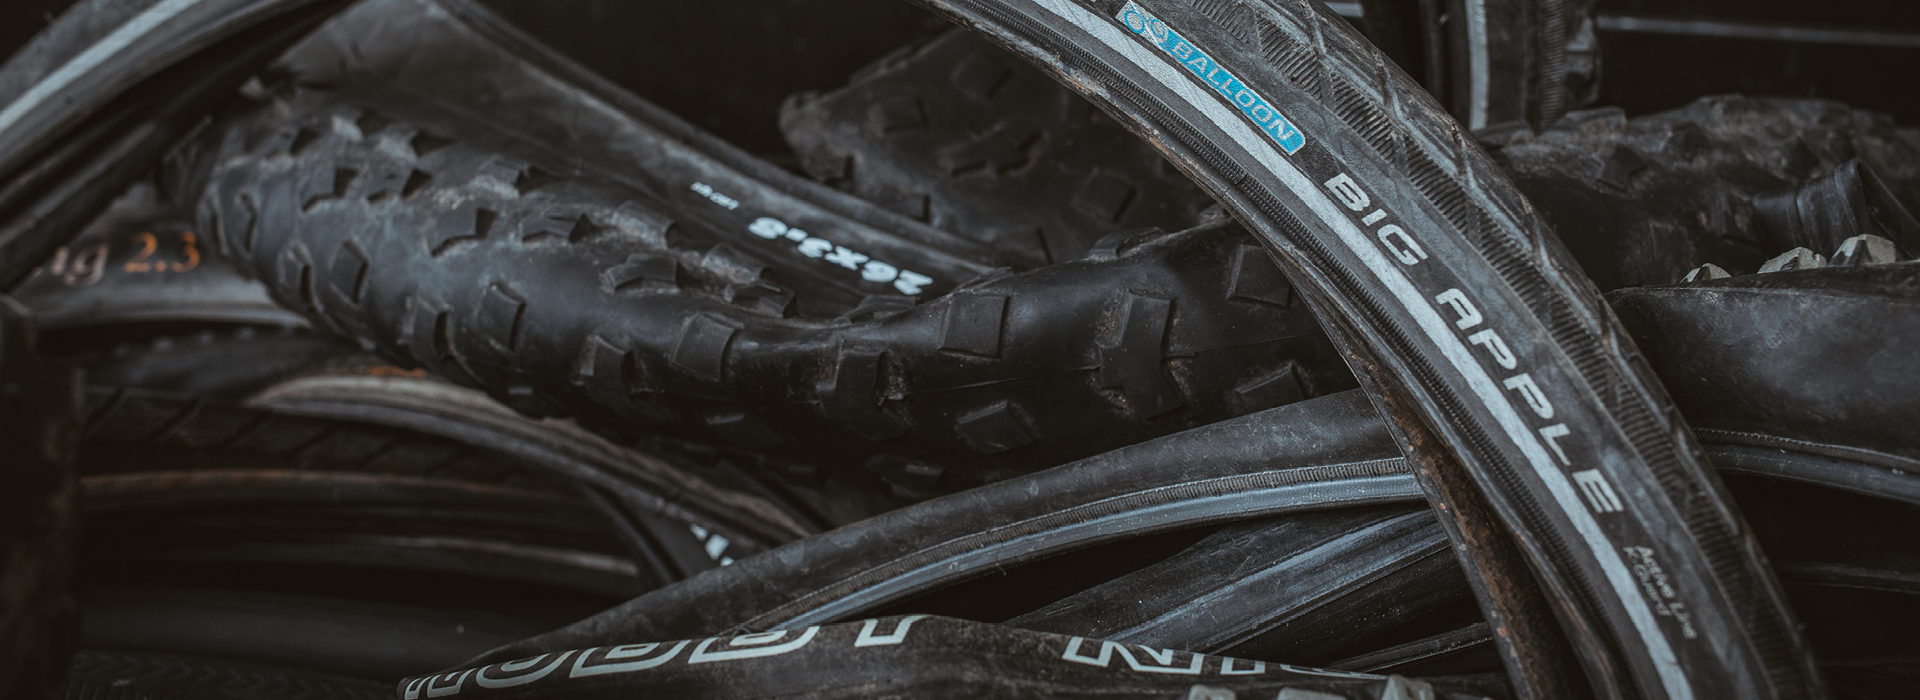 Schwalbe converts 70% of its range to circular tires